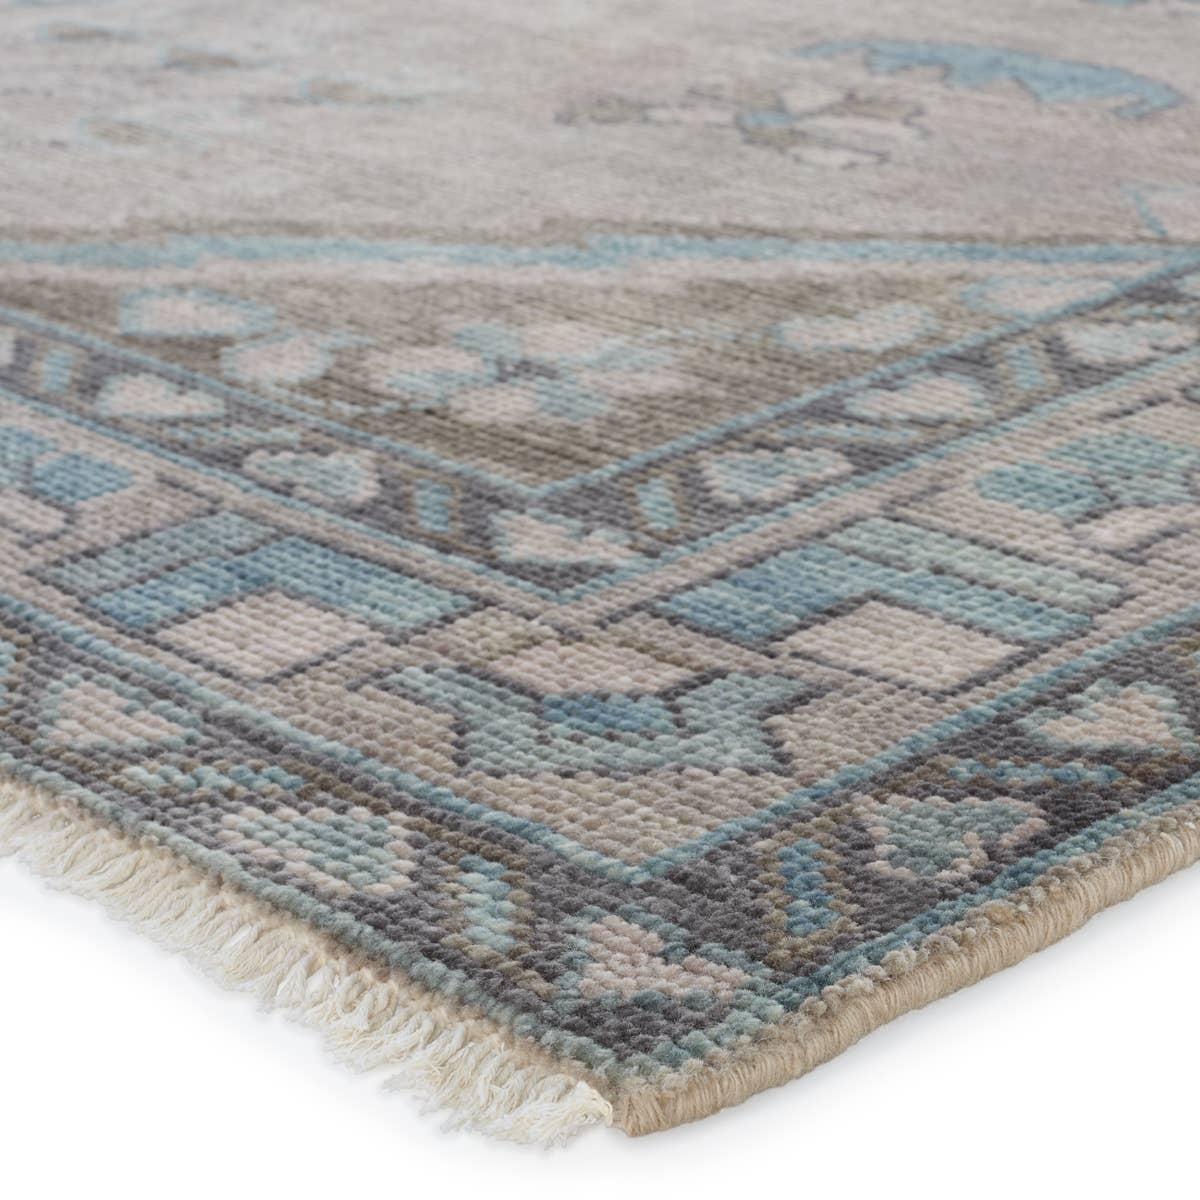 The Salinas Santita is punctuated by both vibrant and neutral hues and combined with intricate details, lending a stunning transitional look to any home. The Santita rug makes a moody statement with grounding hues and a tribal, medallion motifs. This durable, artisan-made rug features geometric accents in a serene gray, blue, and taupe colorway. Amethyst Home provides interior design, new home construction design consulting, vintage area rugs, and lighting in the Monterey metro area.